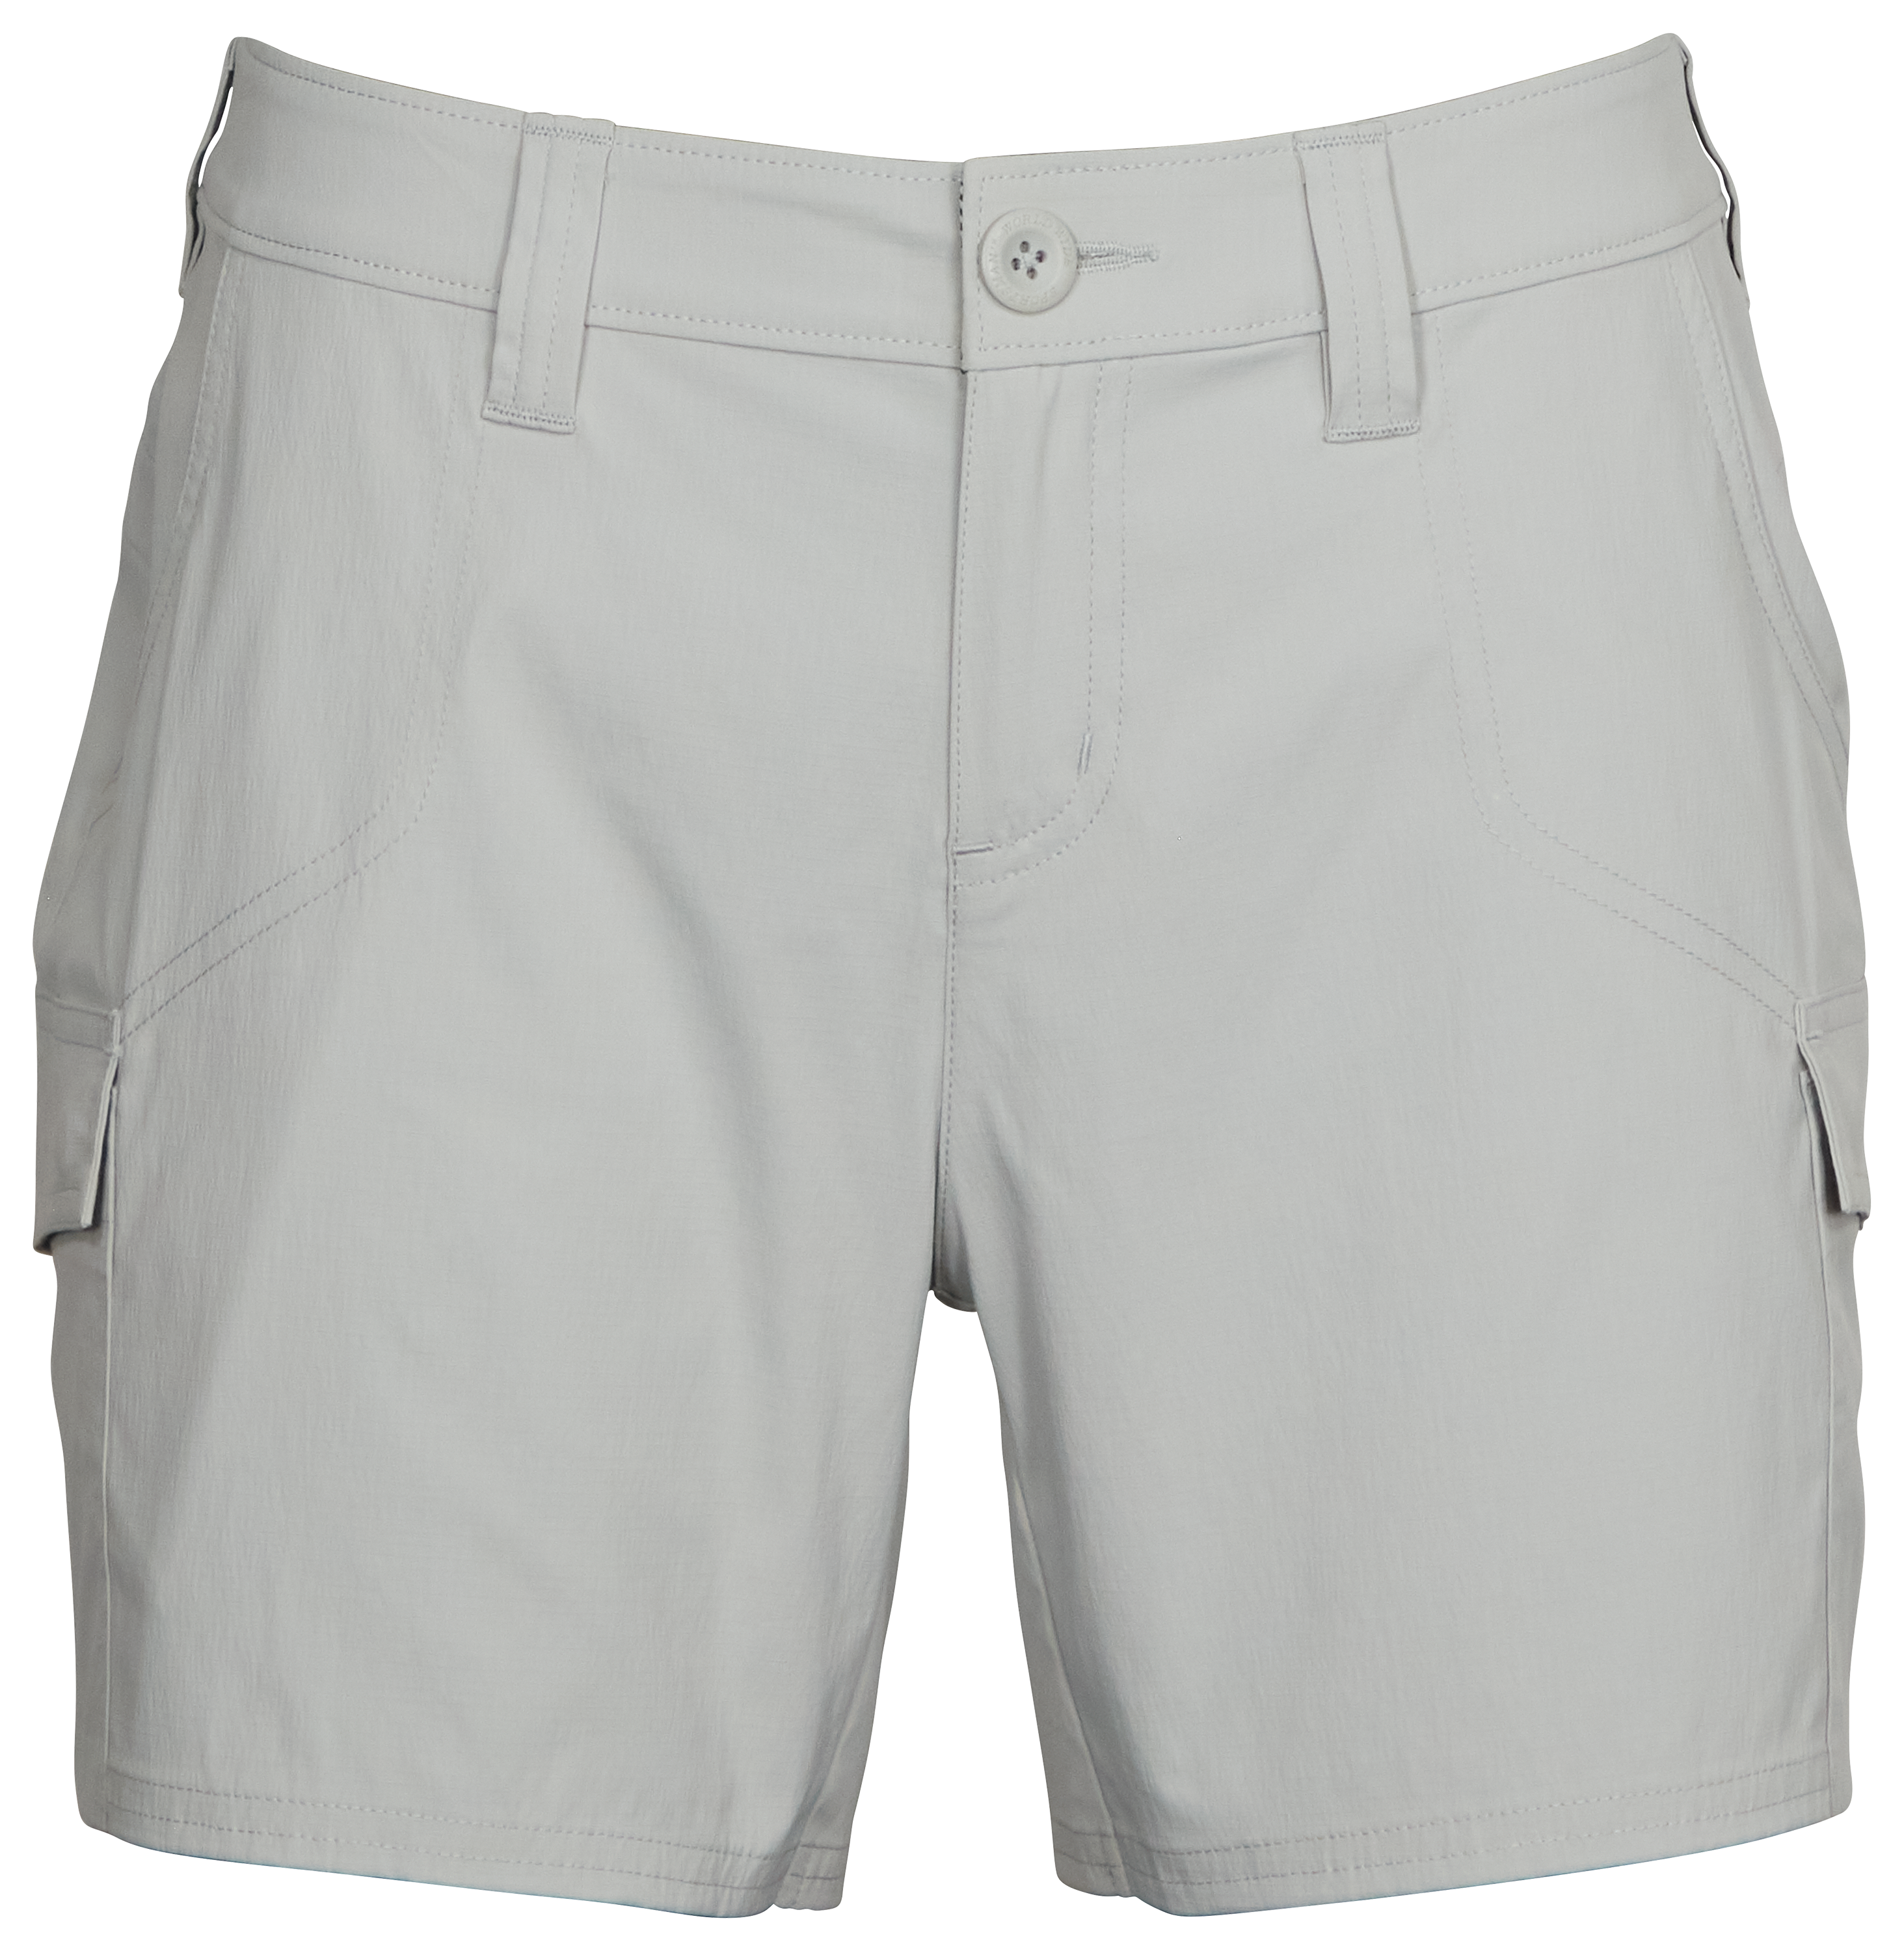 World Wide Sportsman Ripstop Cargo Shorts for Ladies - High Rise - 14